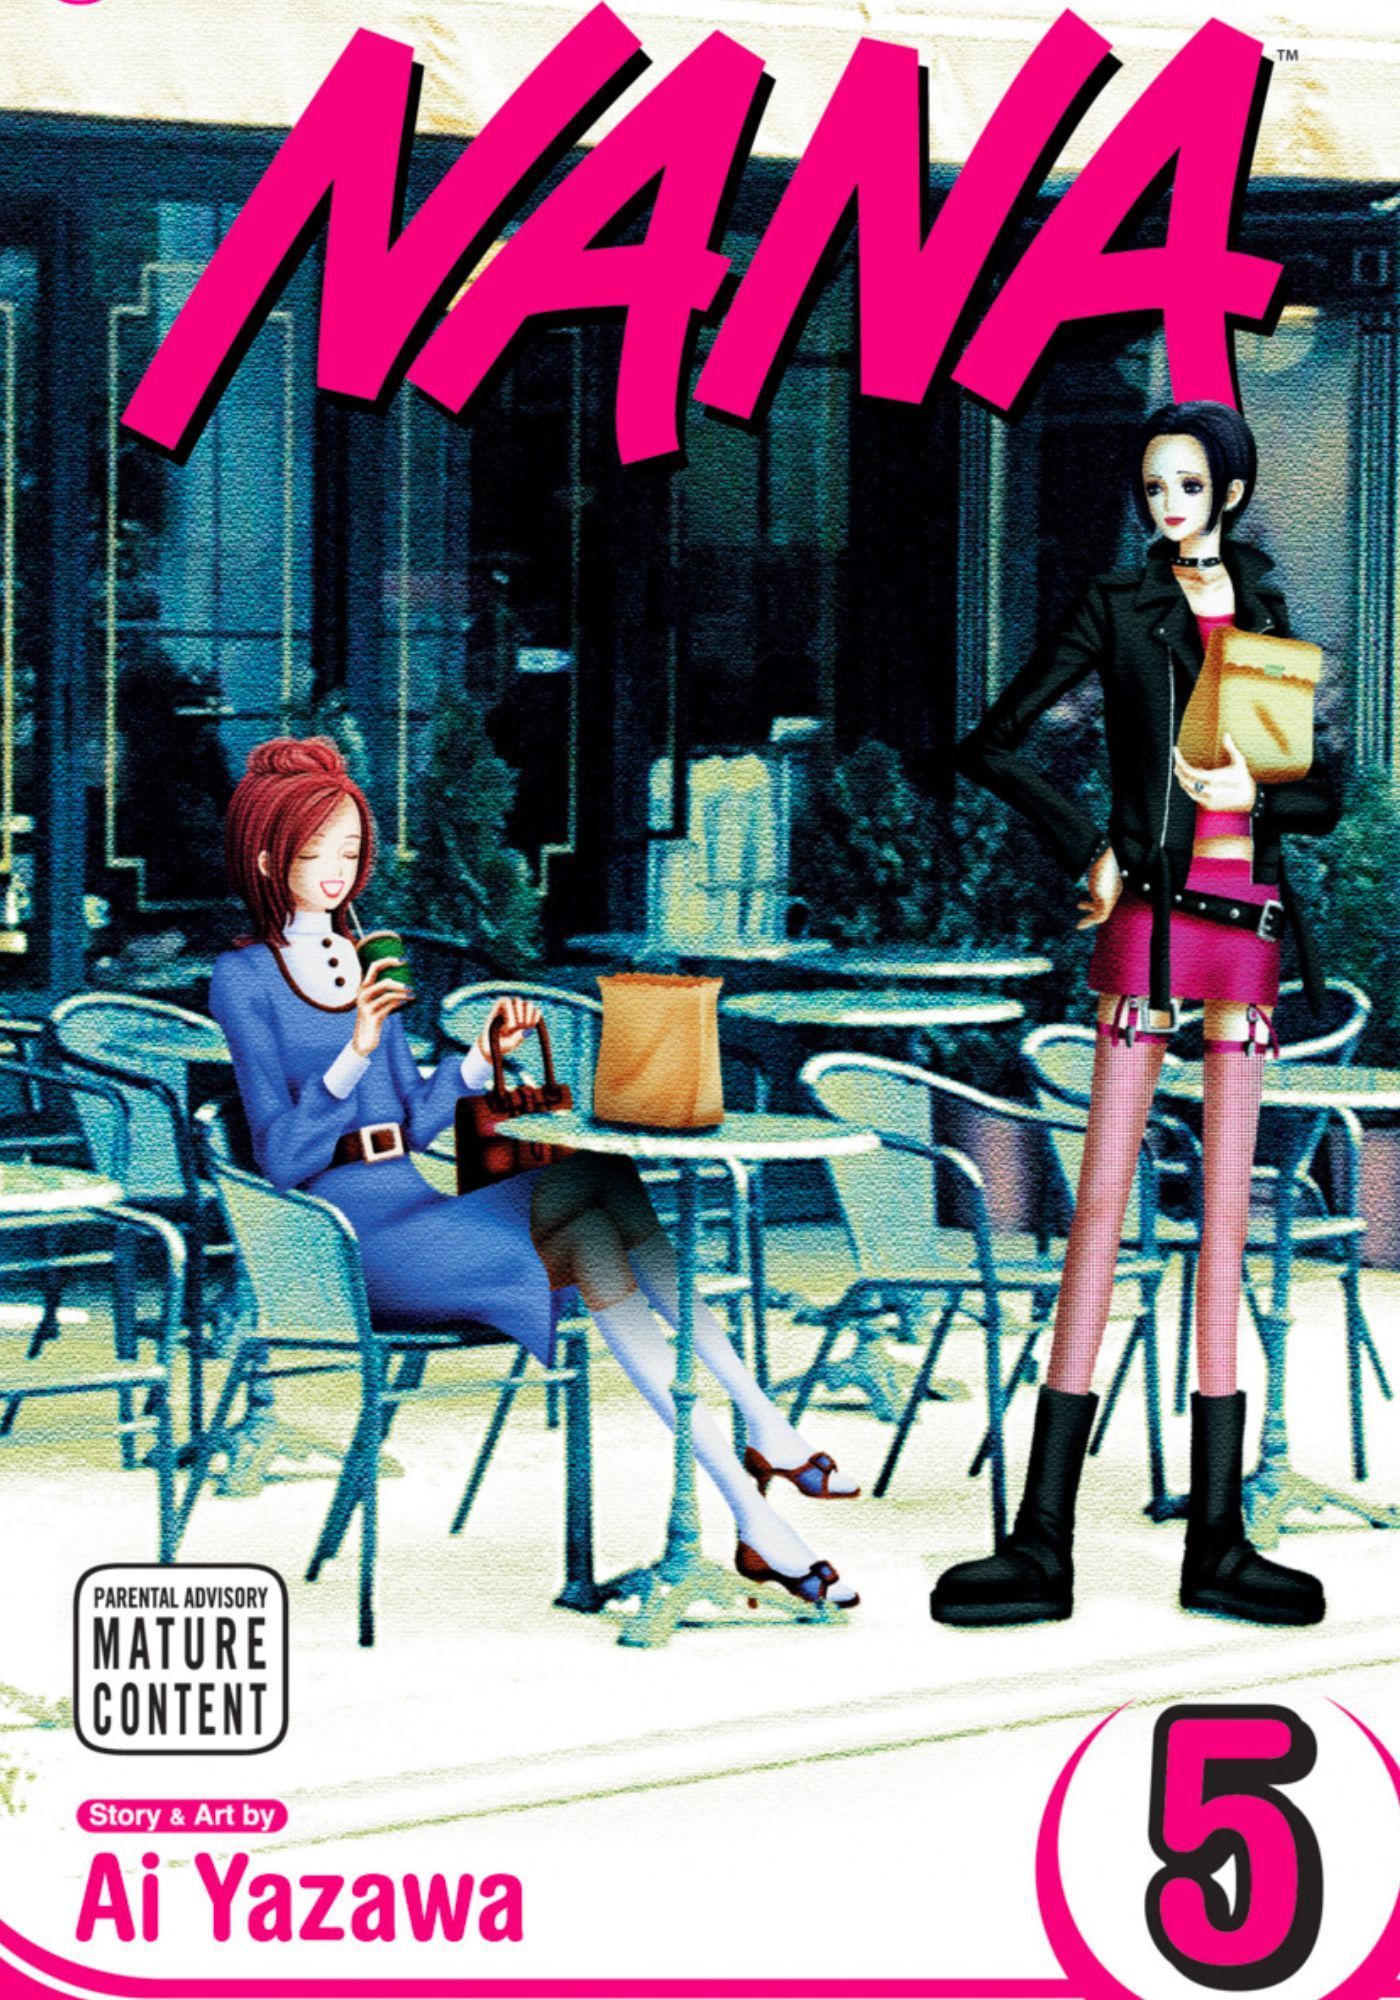 NANA volume 5 cover art depicting Hachi sitting at a cafe table enjoying a drink while Nana stands to the side.